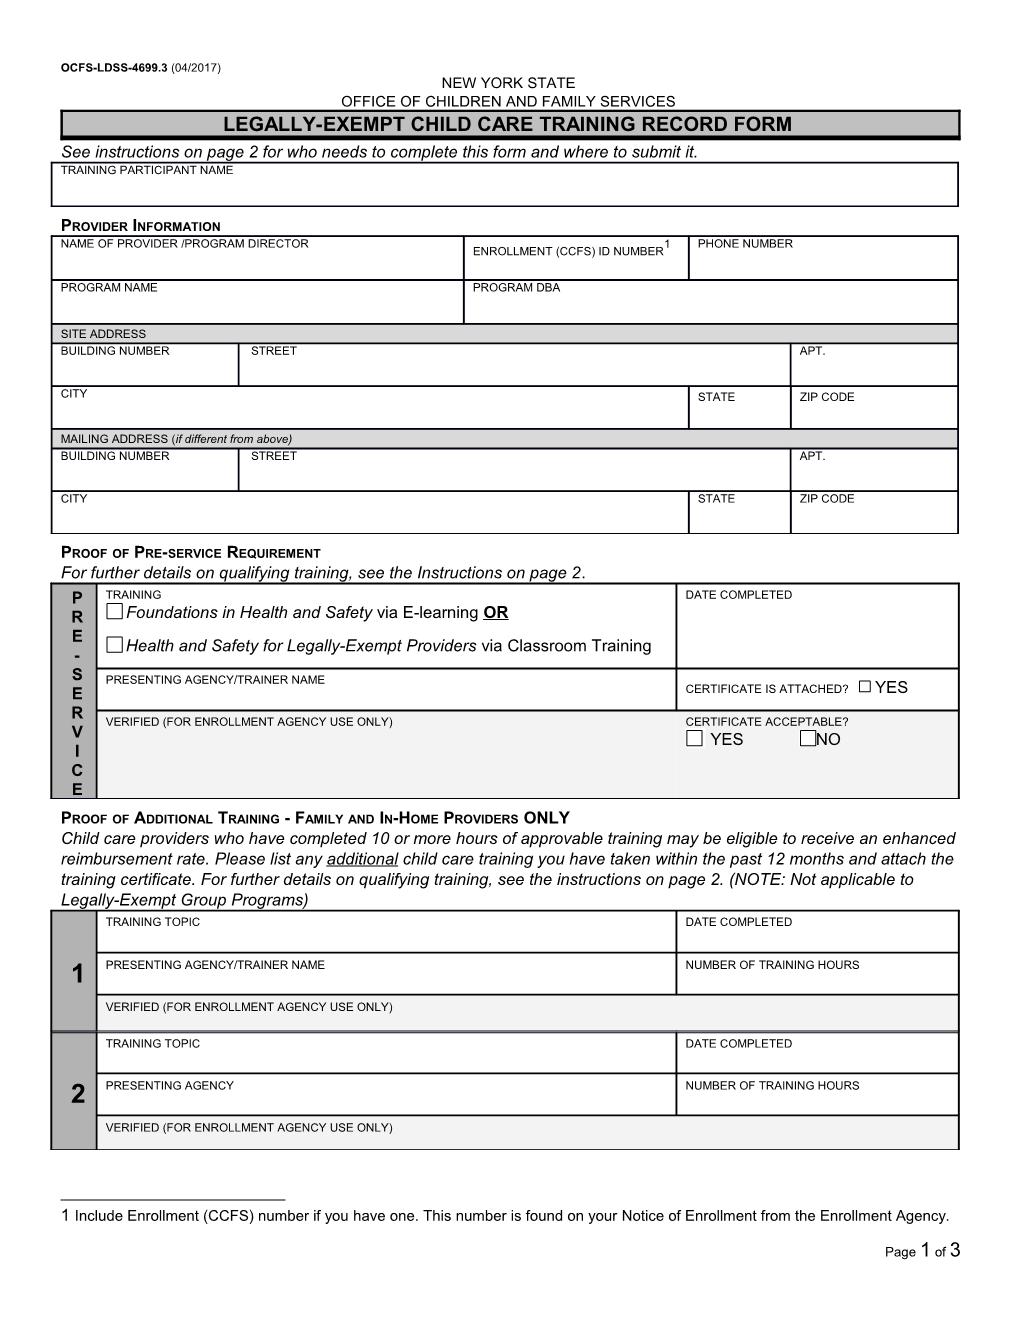 Legally-Exempt Child Care Training Record Form